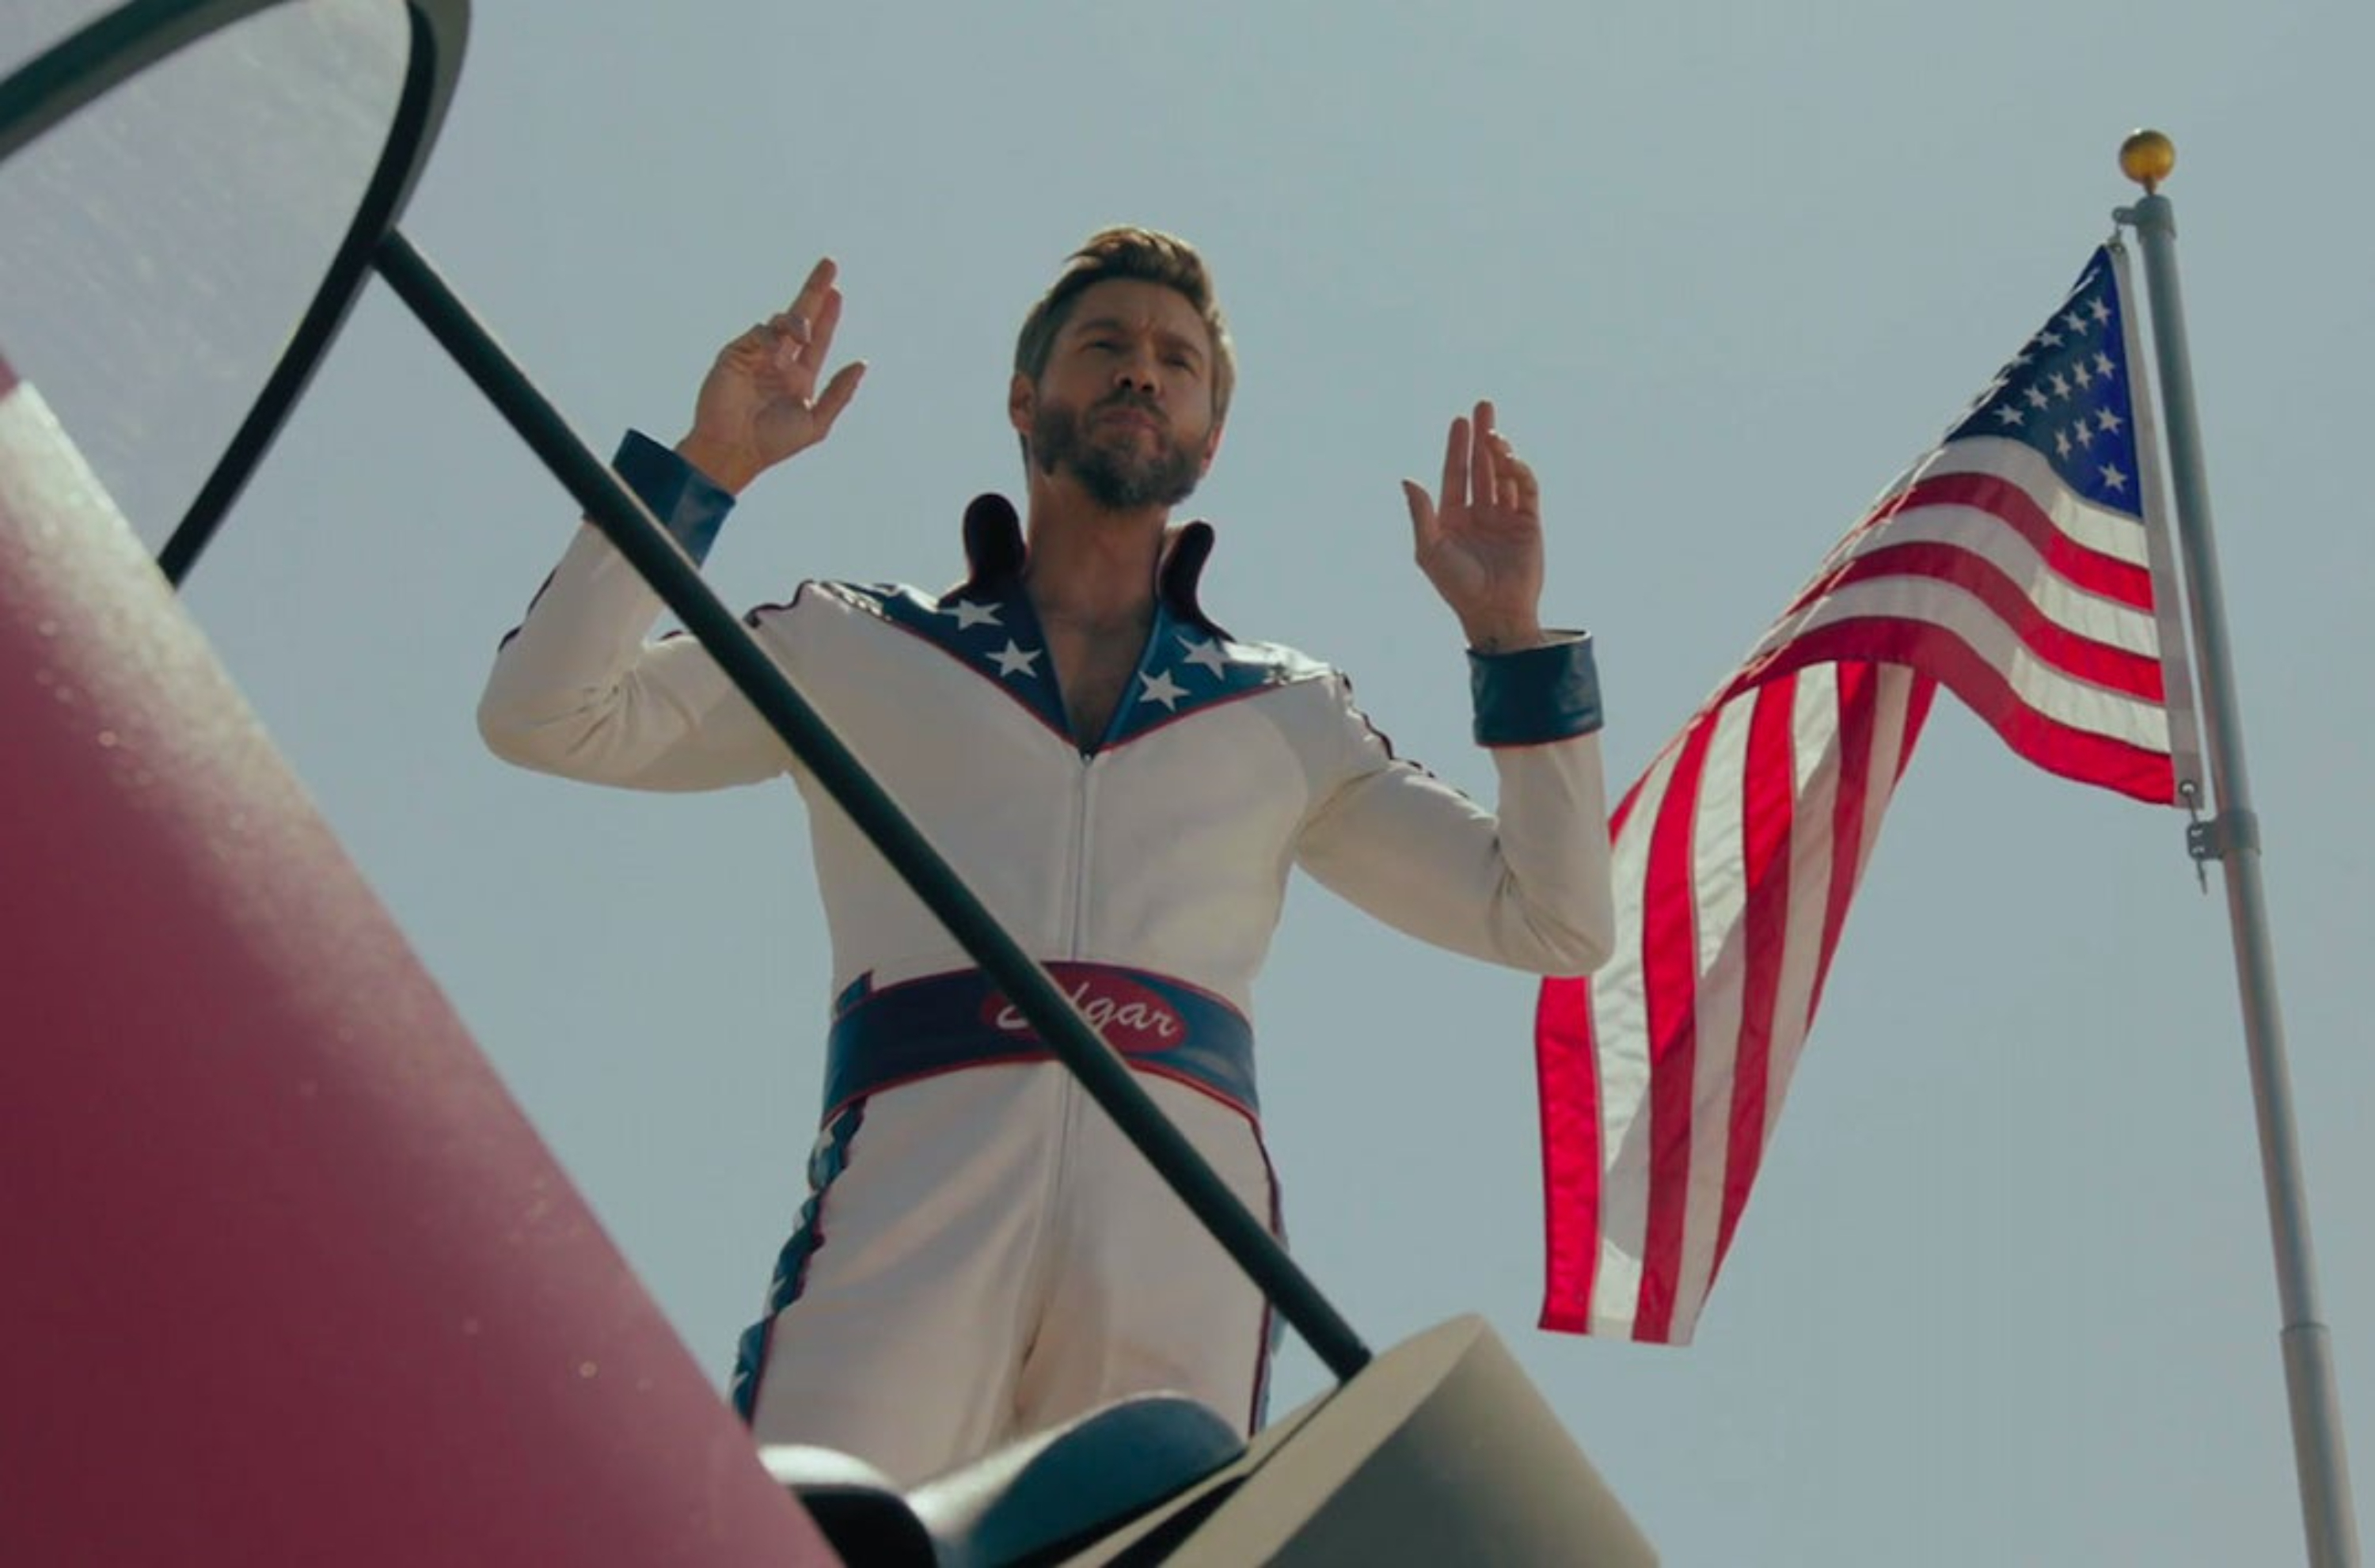 Edgar Evernever, a man with short dirty blonde hair and a beard, stands with his hands in the air. He is wearing a white bodysuit, with blue and red details. The flag of the USA stands next to him.